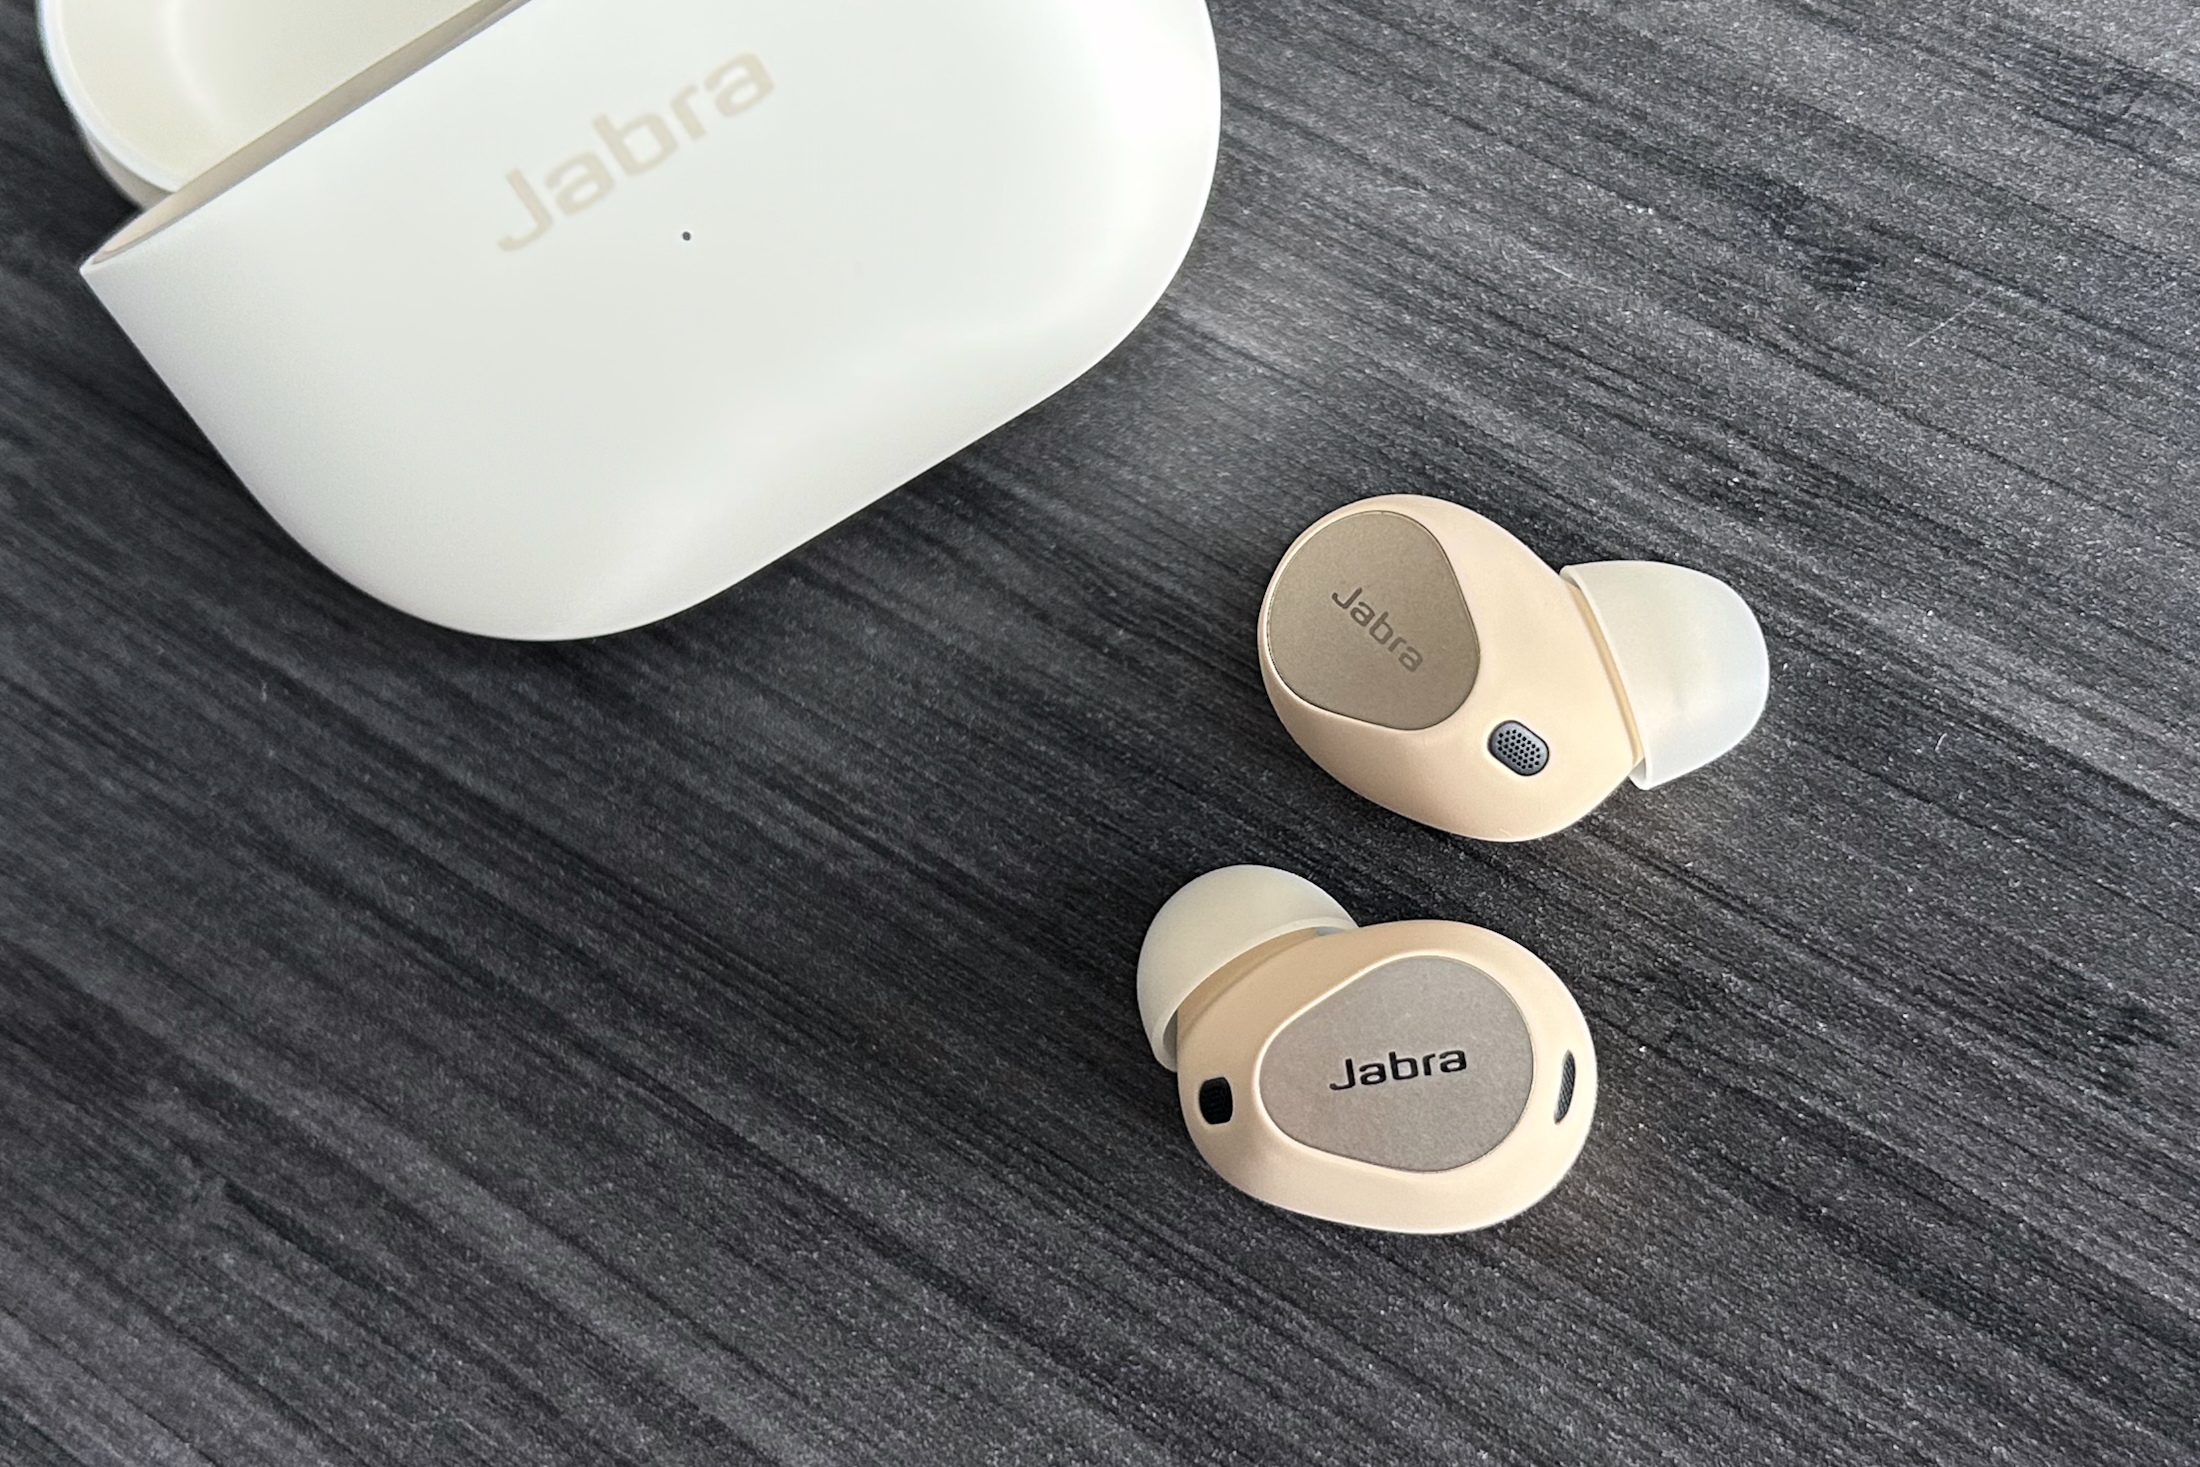 The Jabra Elite 85t True Wireless Headphones Review: Great Sound and ANC